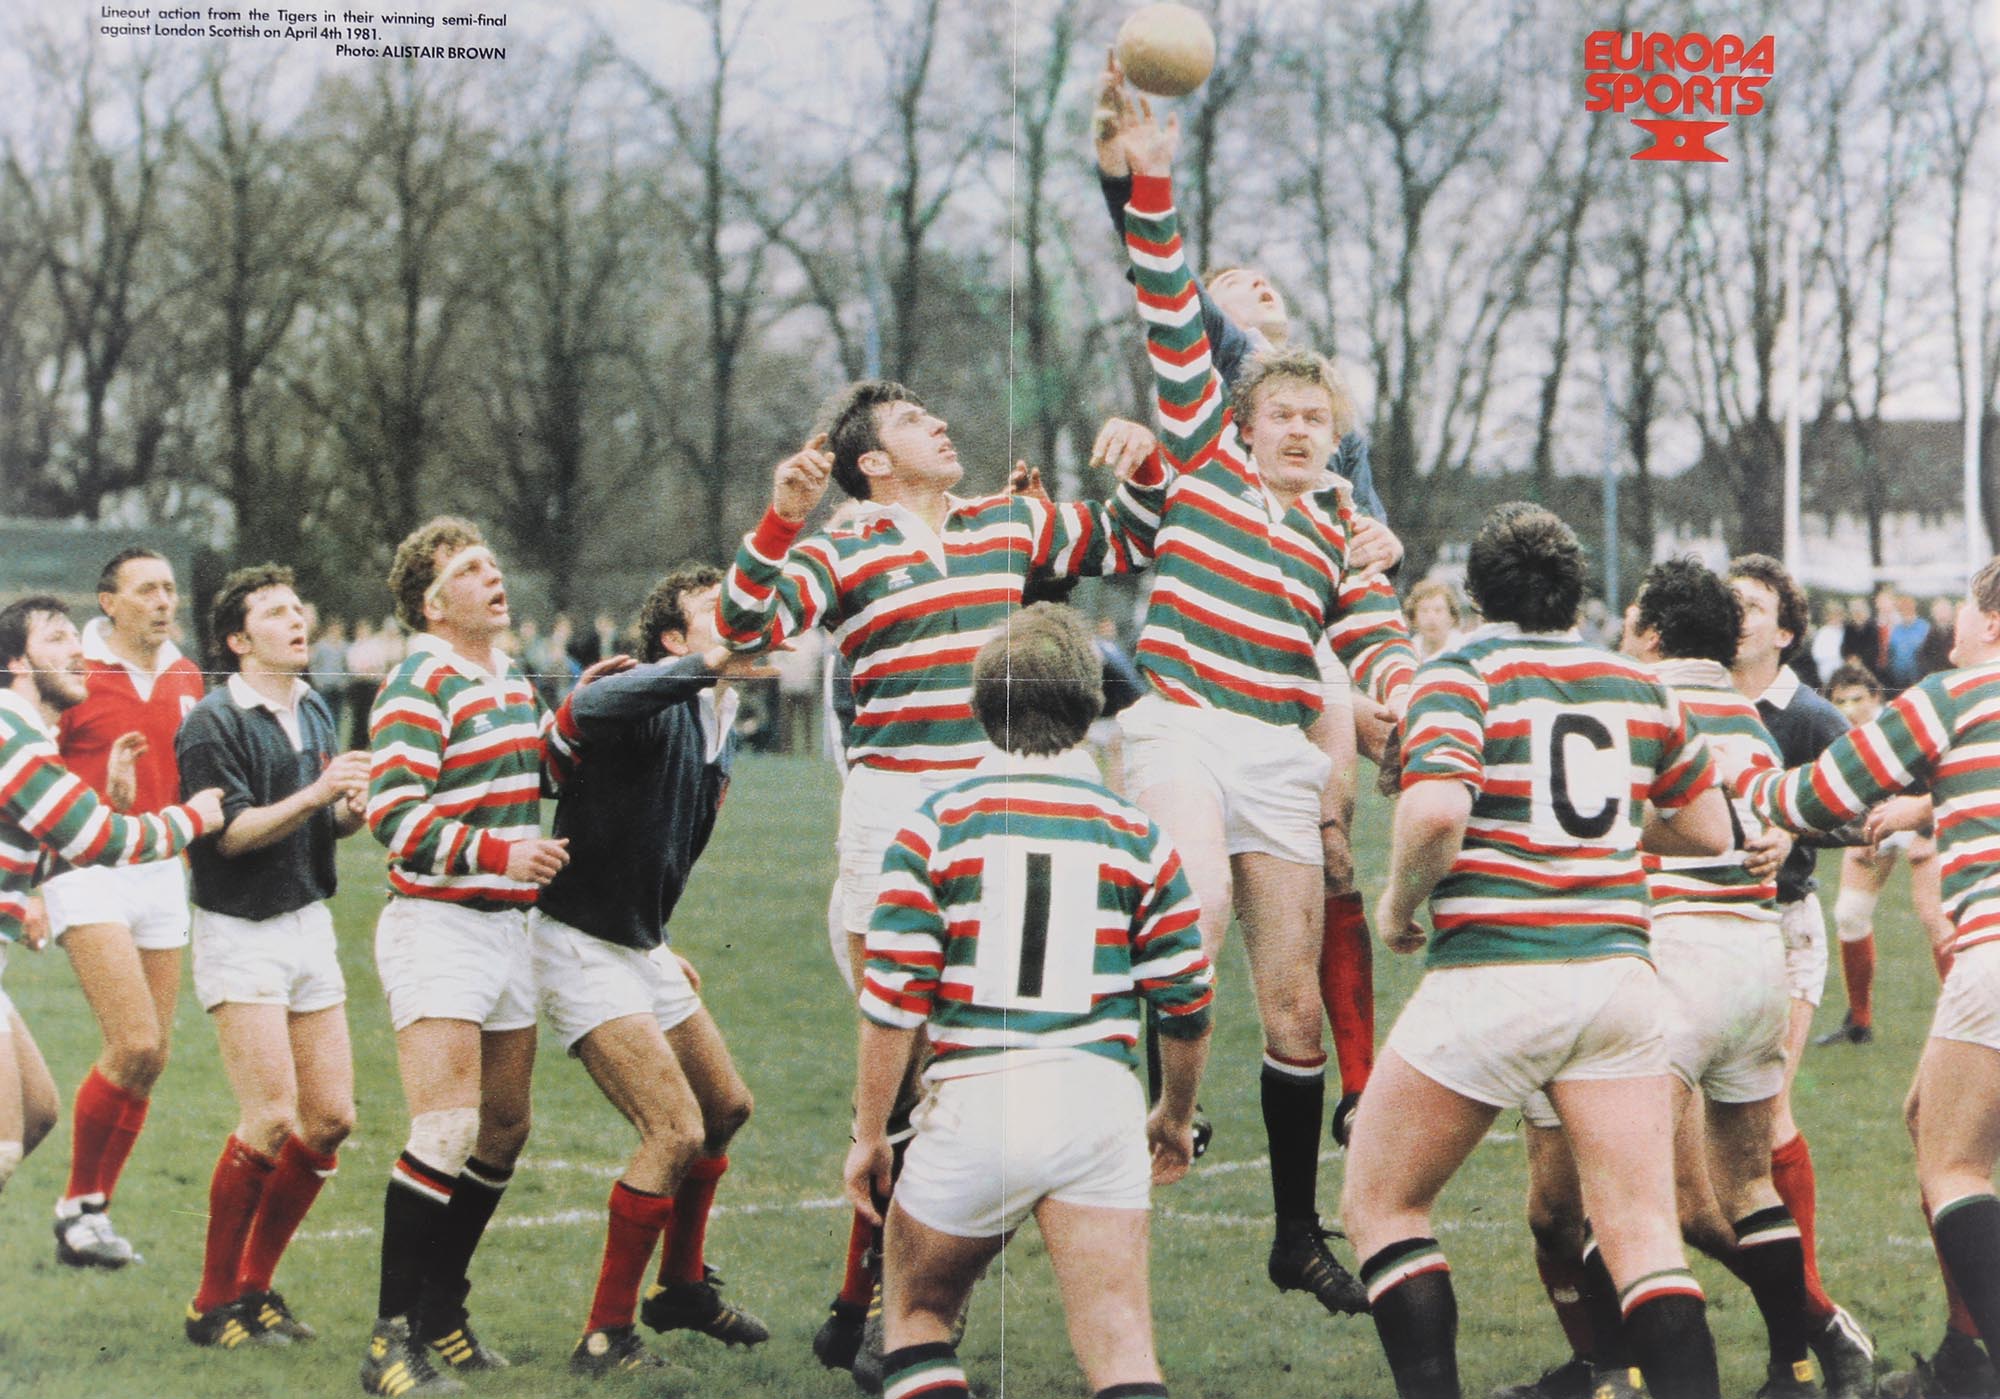 rugby poster.JPG